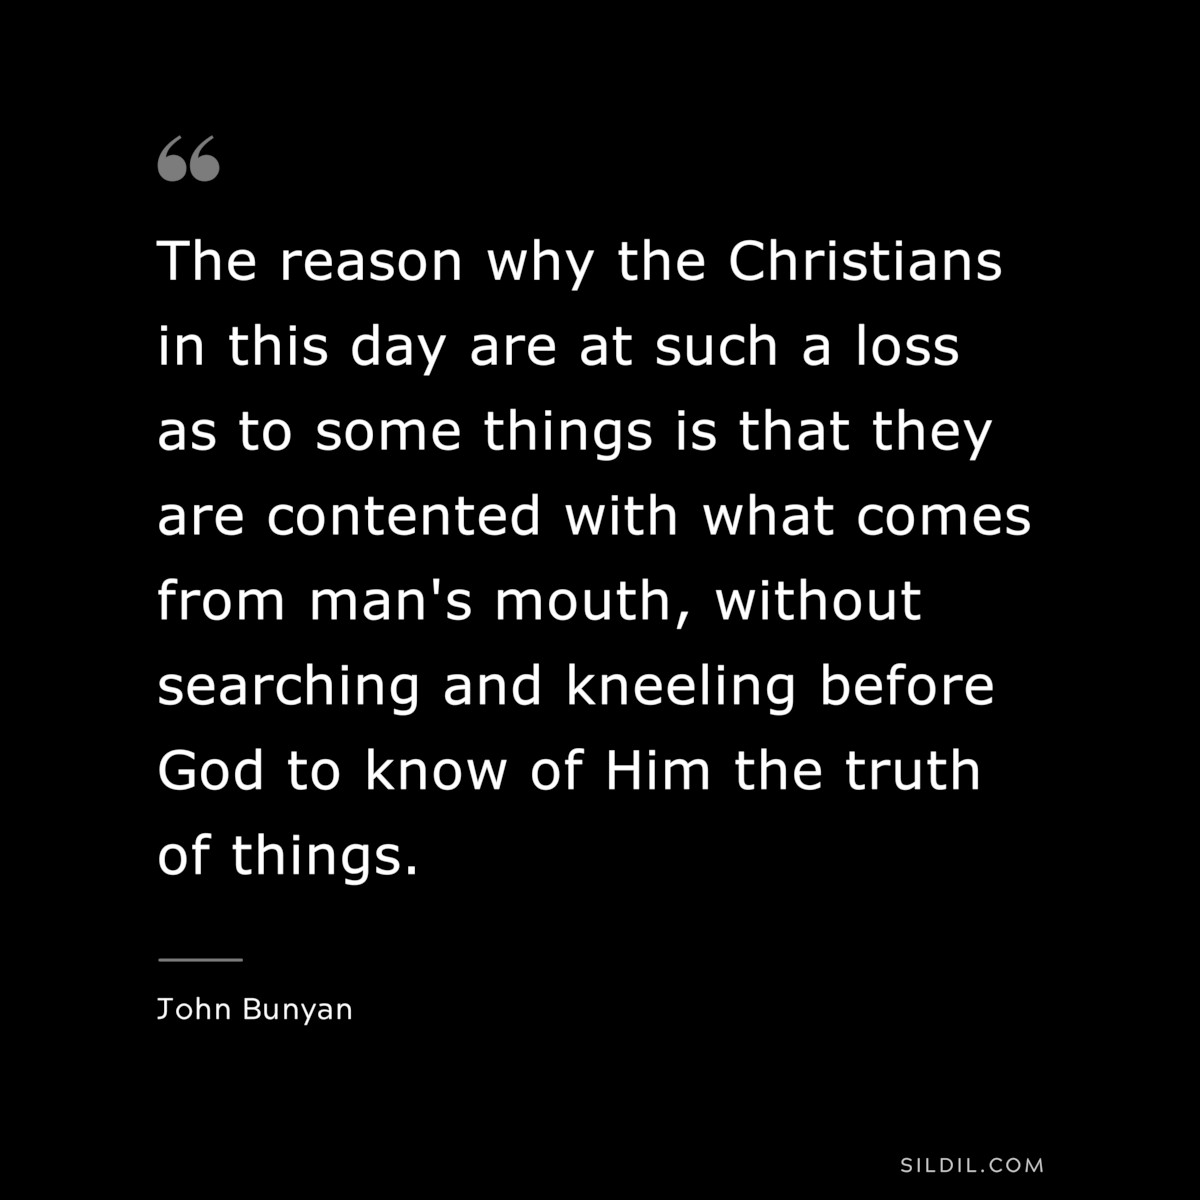 The reason why the Christians in this day are at such a loss as to some things is that they are contented with what comes from man's mouth, without searching and kneeling before God to know of Him the truth of things. ― John Bunyan